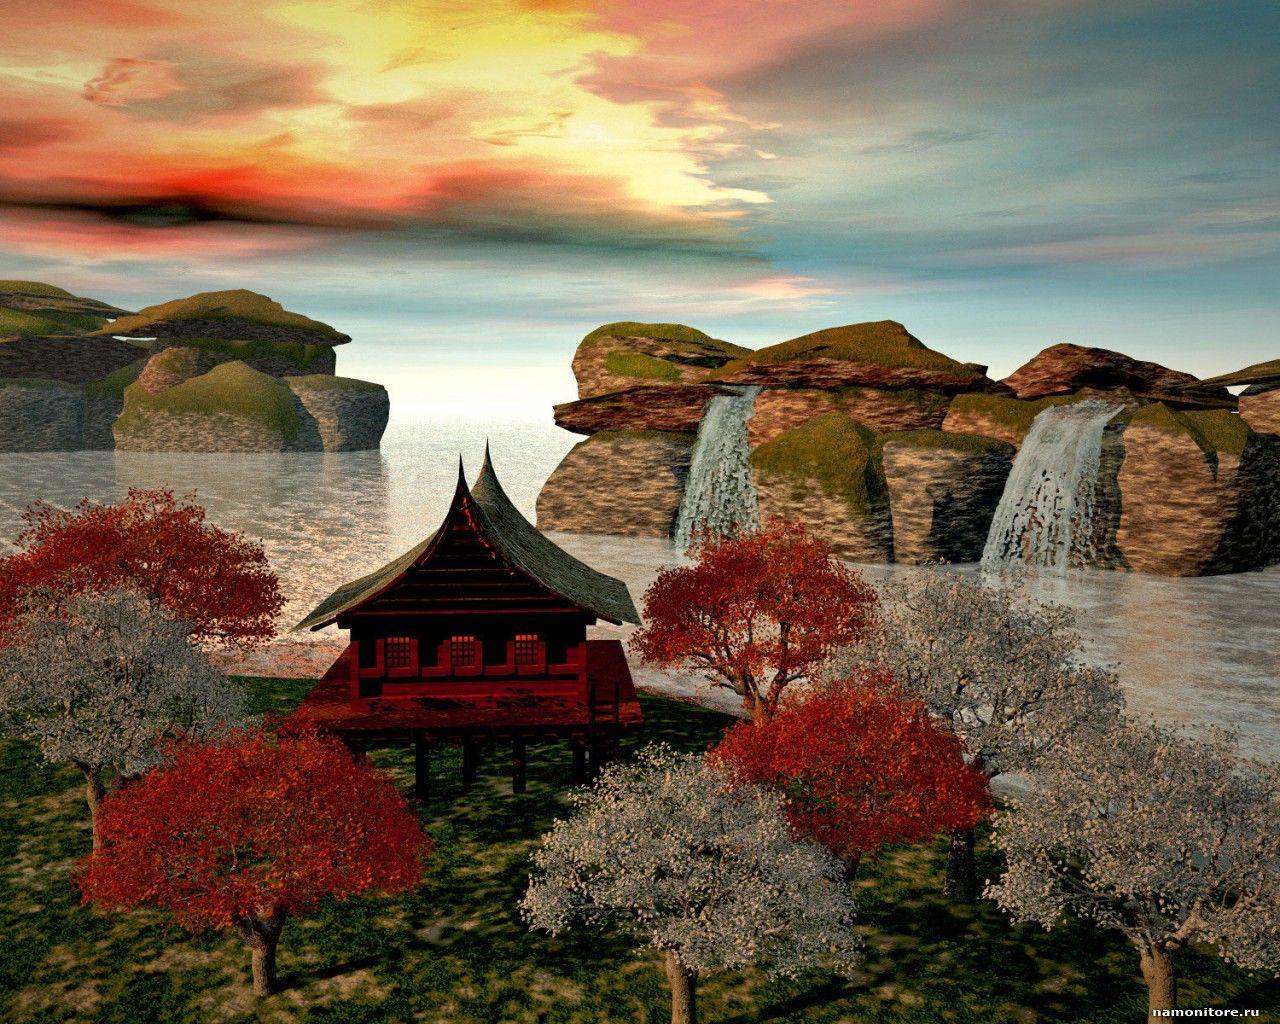 The Japanese dream, 3D, drawed, Japan, landscapes, nature, pagoda